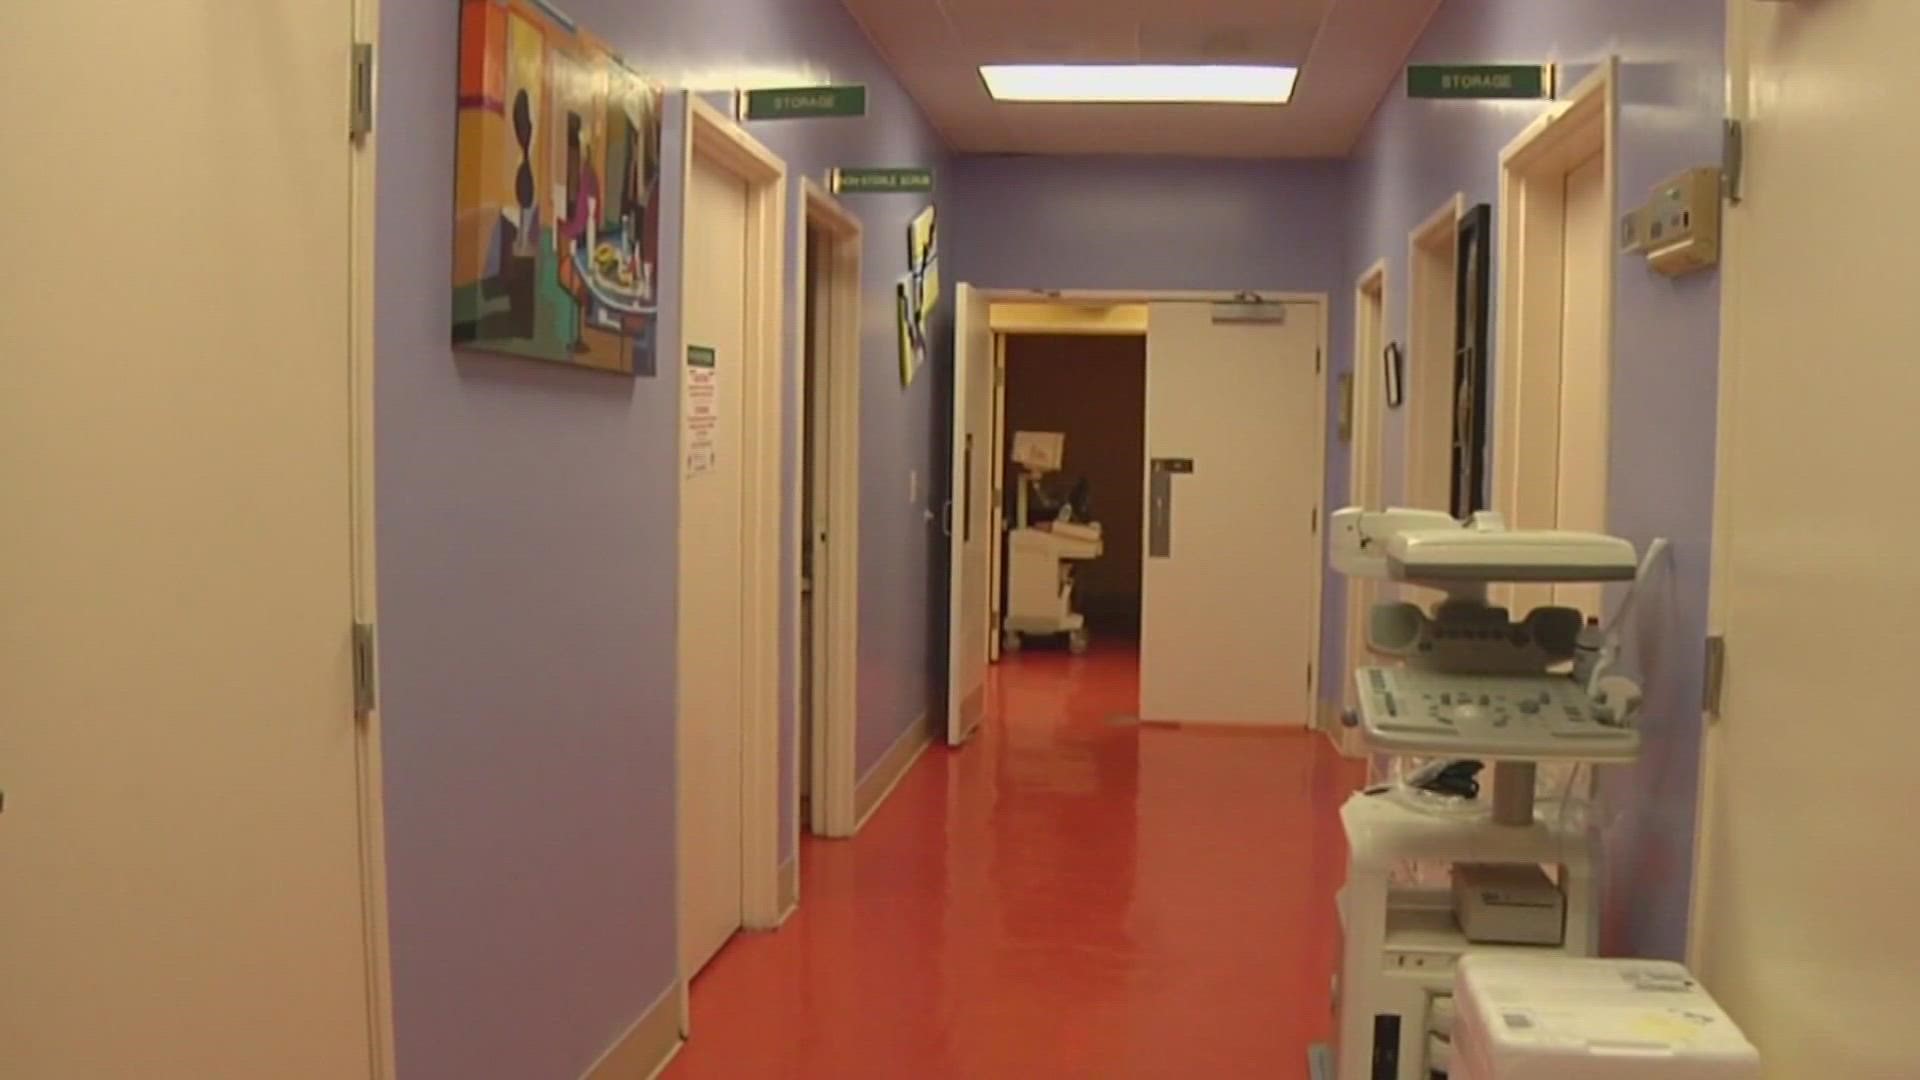 WFMY News 2's Jenna Kurzyna takes a closer look at the history of abortion in North Carolina.